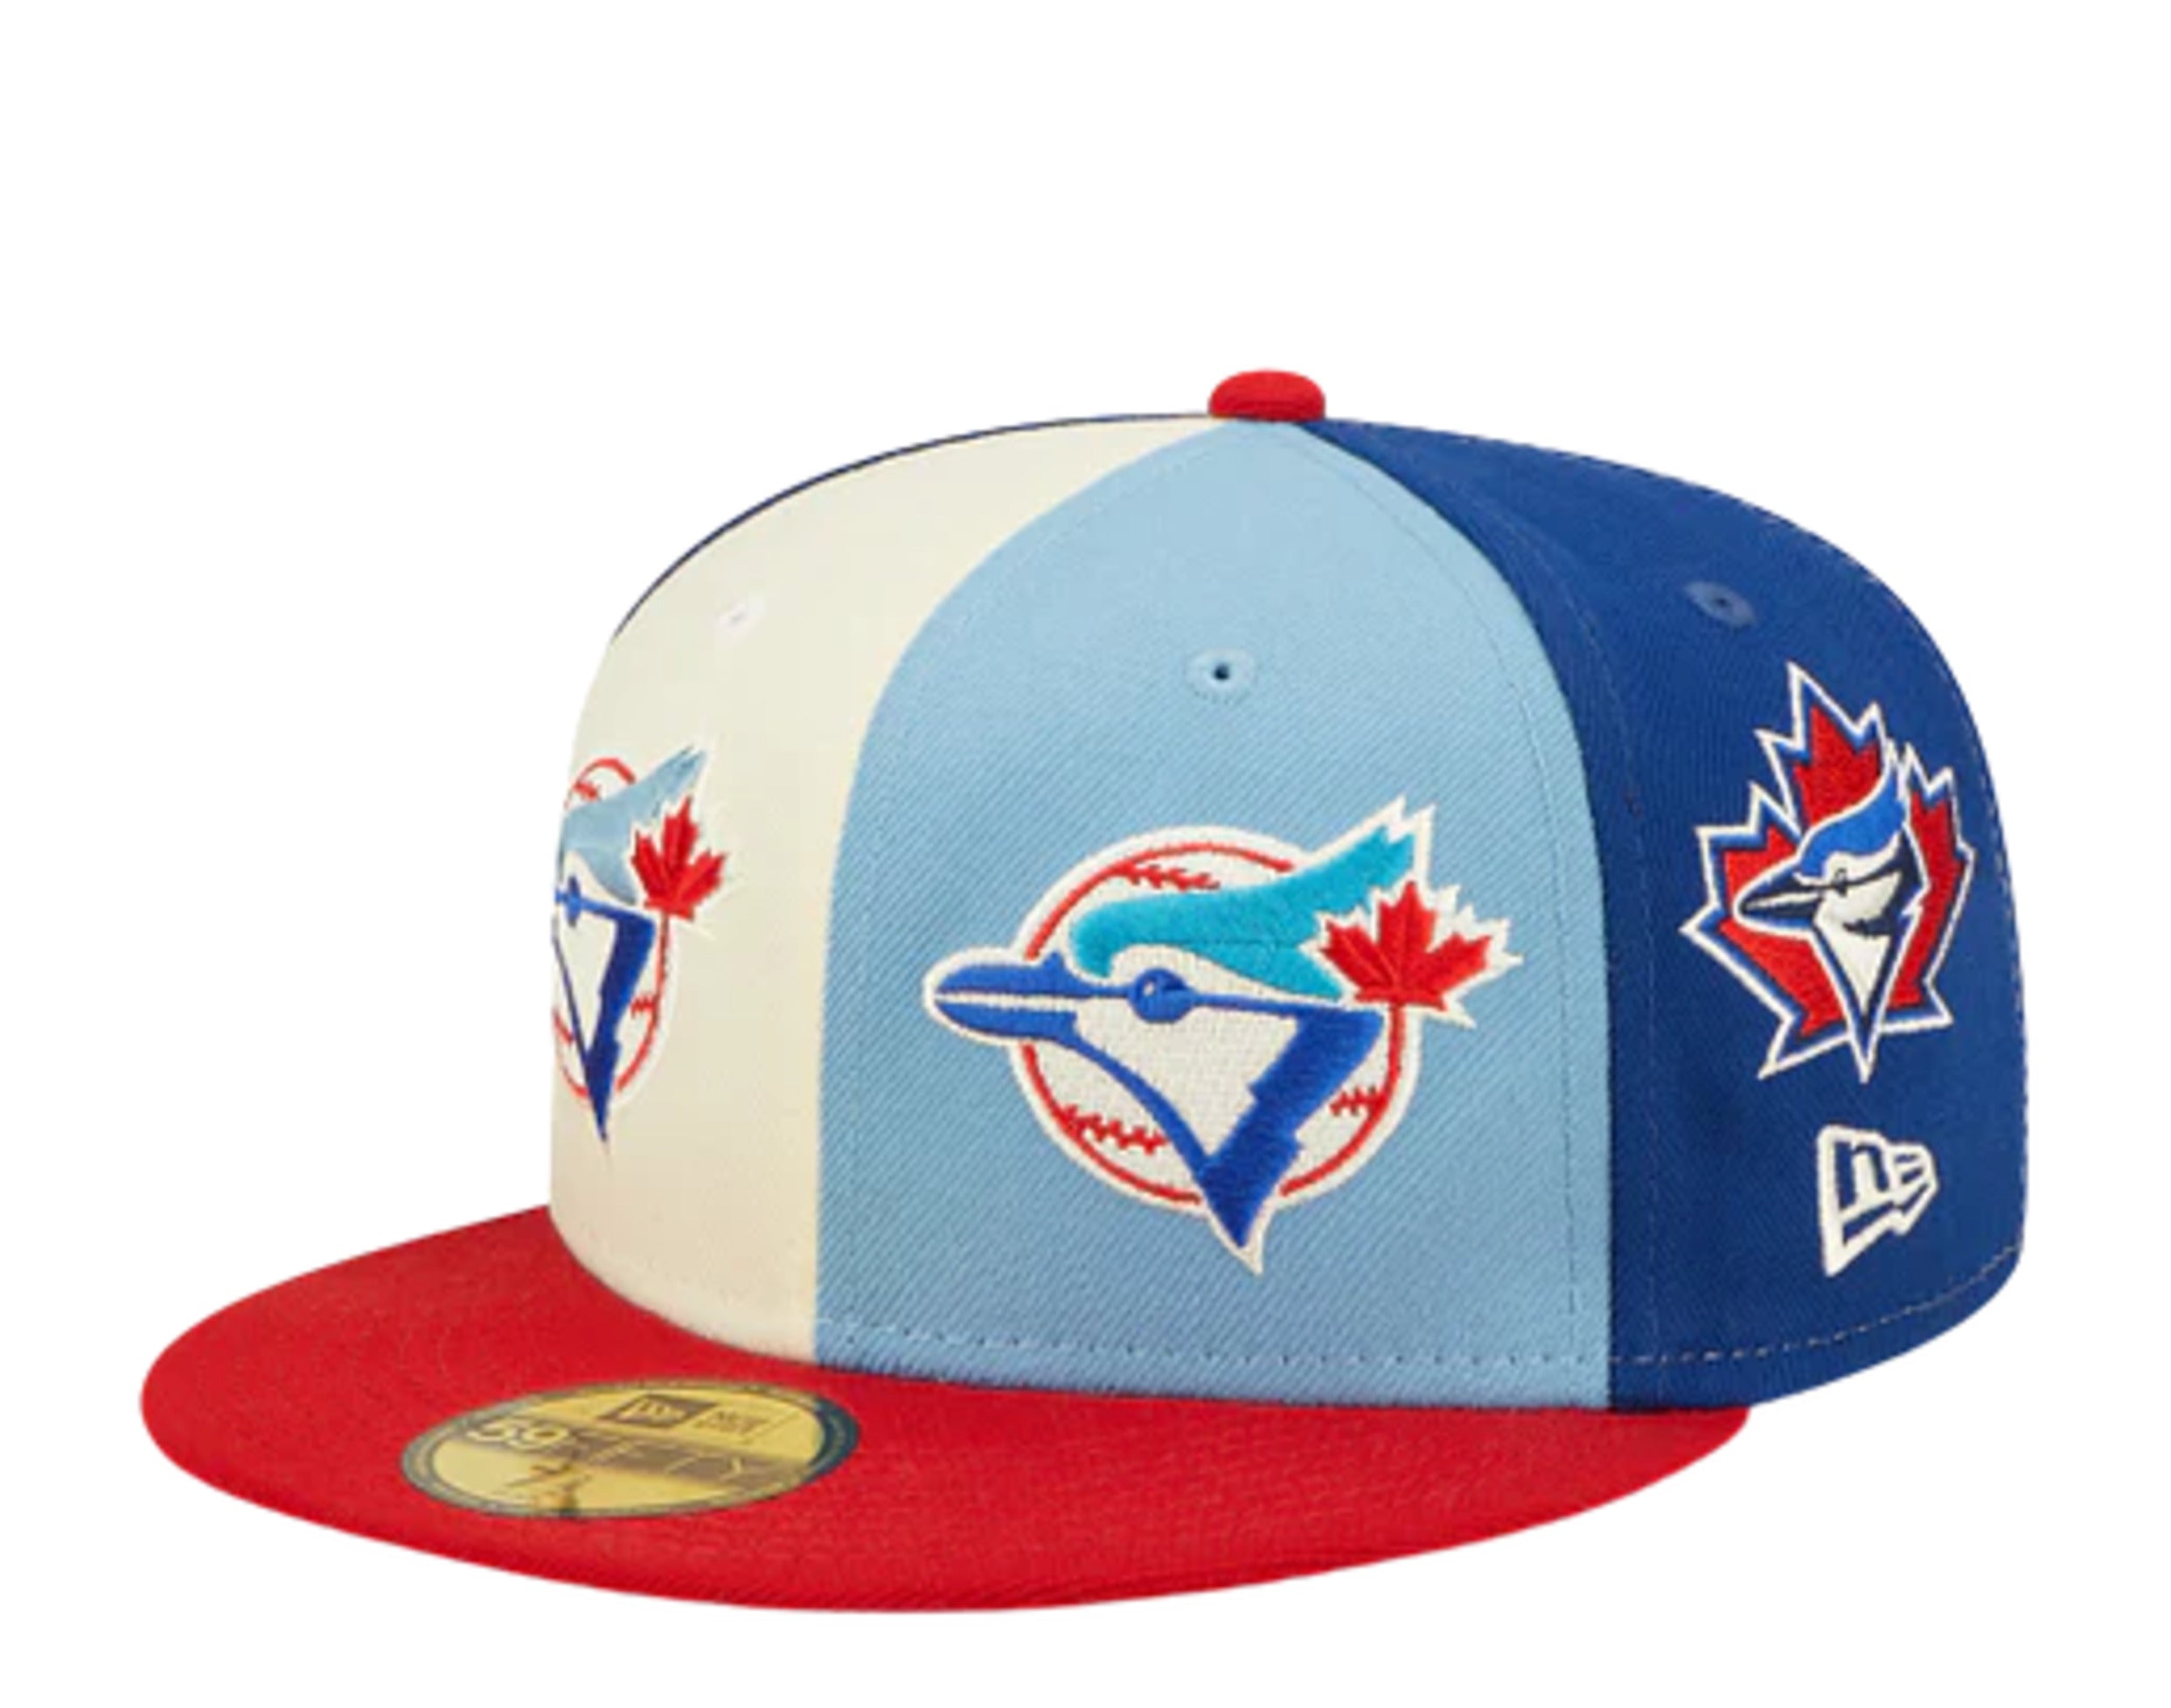 Toronto Blue Jays on X: The NEW Jays Shop flagship store is